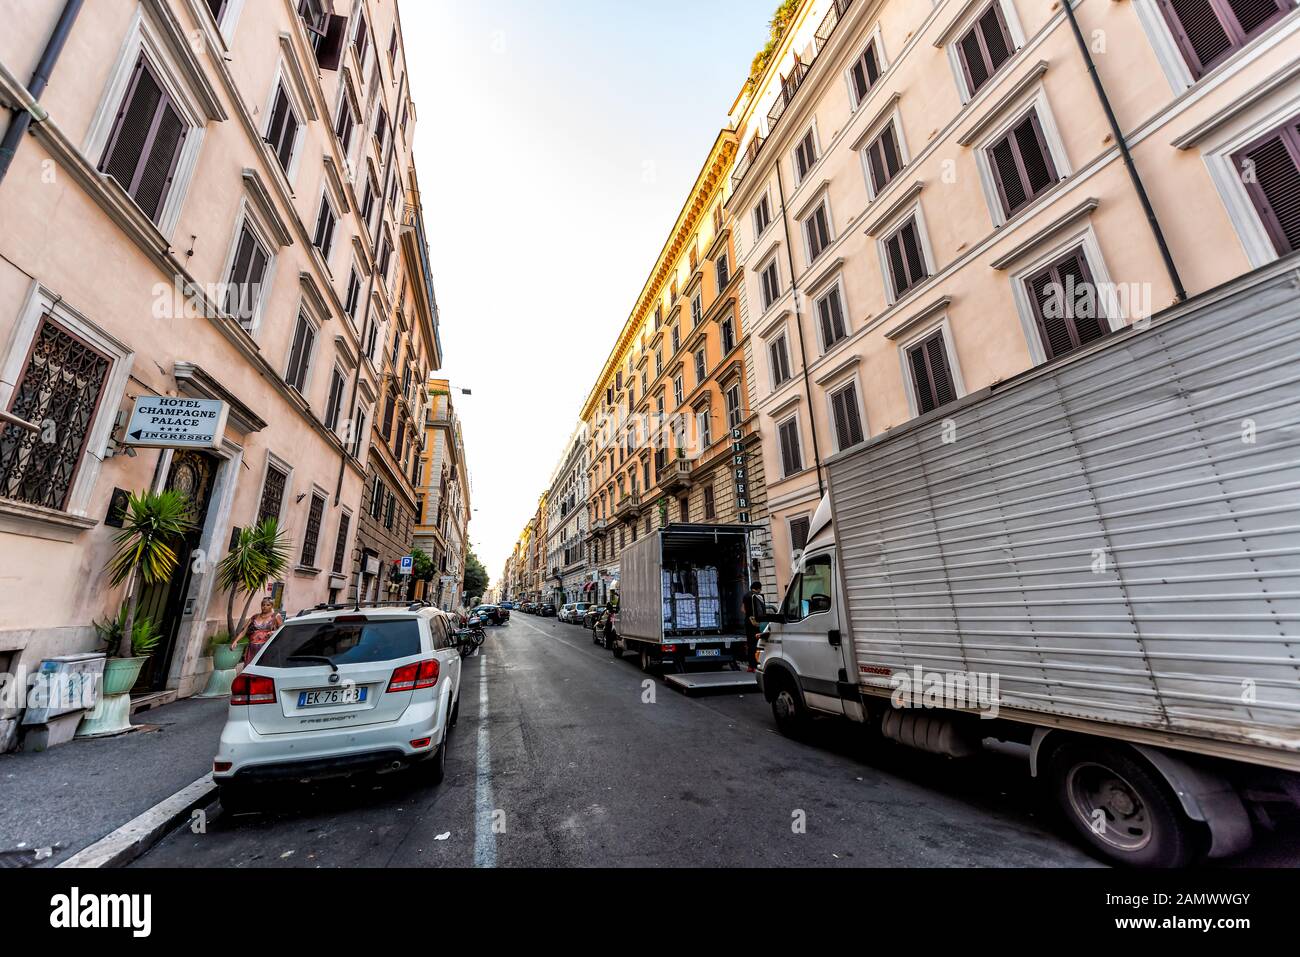 Rome, Italy - September 5, 2018: Italian street outside in city morning wide angle road with delivery trucks on Via Principe Amedeo with hotel sign Stock Photo